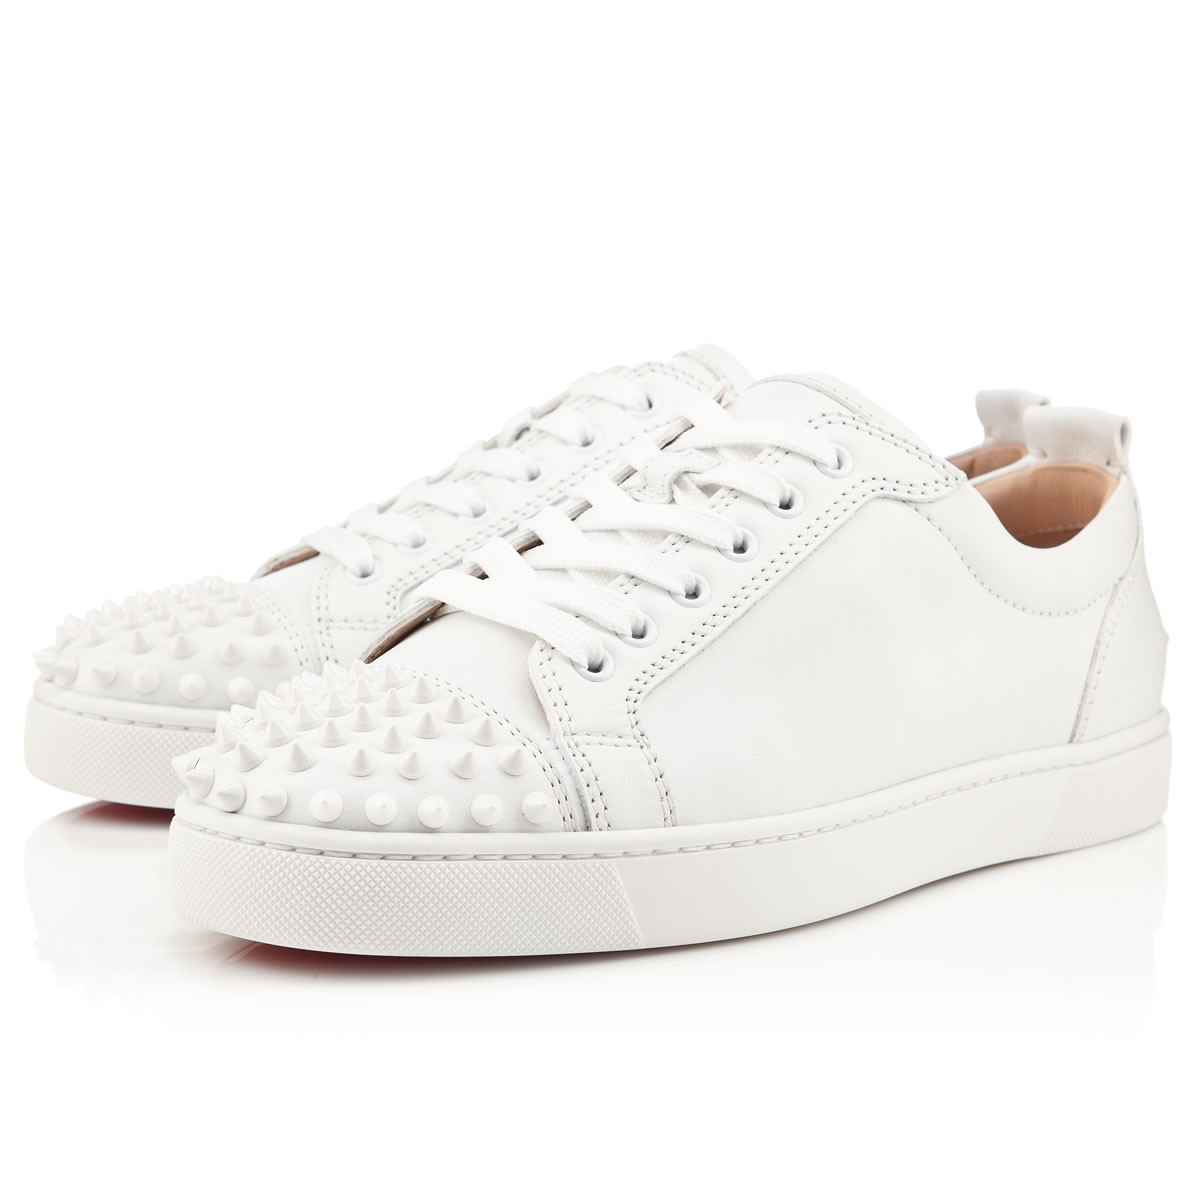 Louis Junior Spikes - Sneakers - Calf leather and spikes - White -  Christian Louboutin